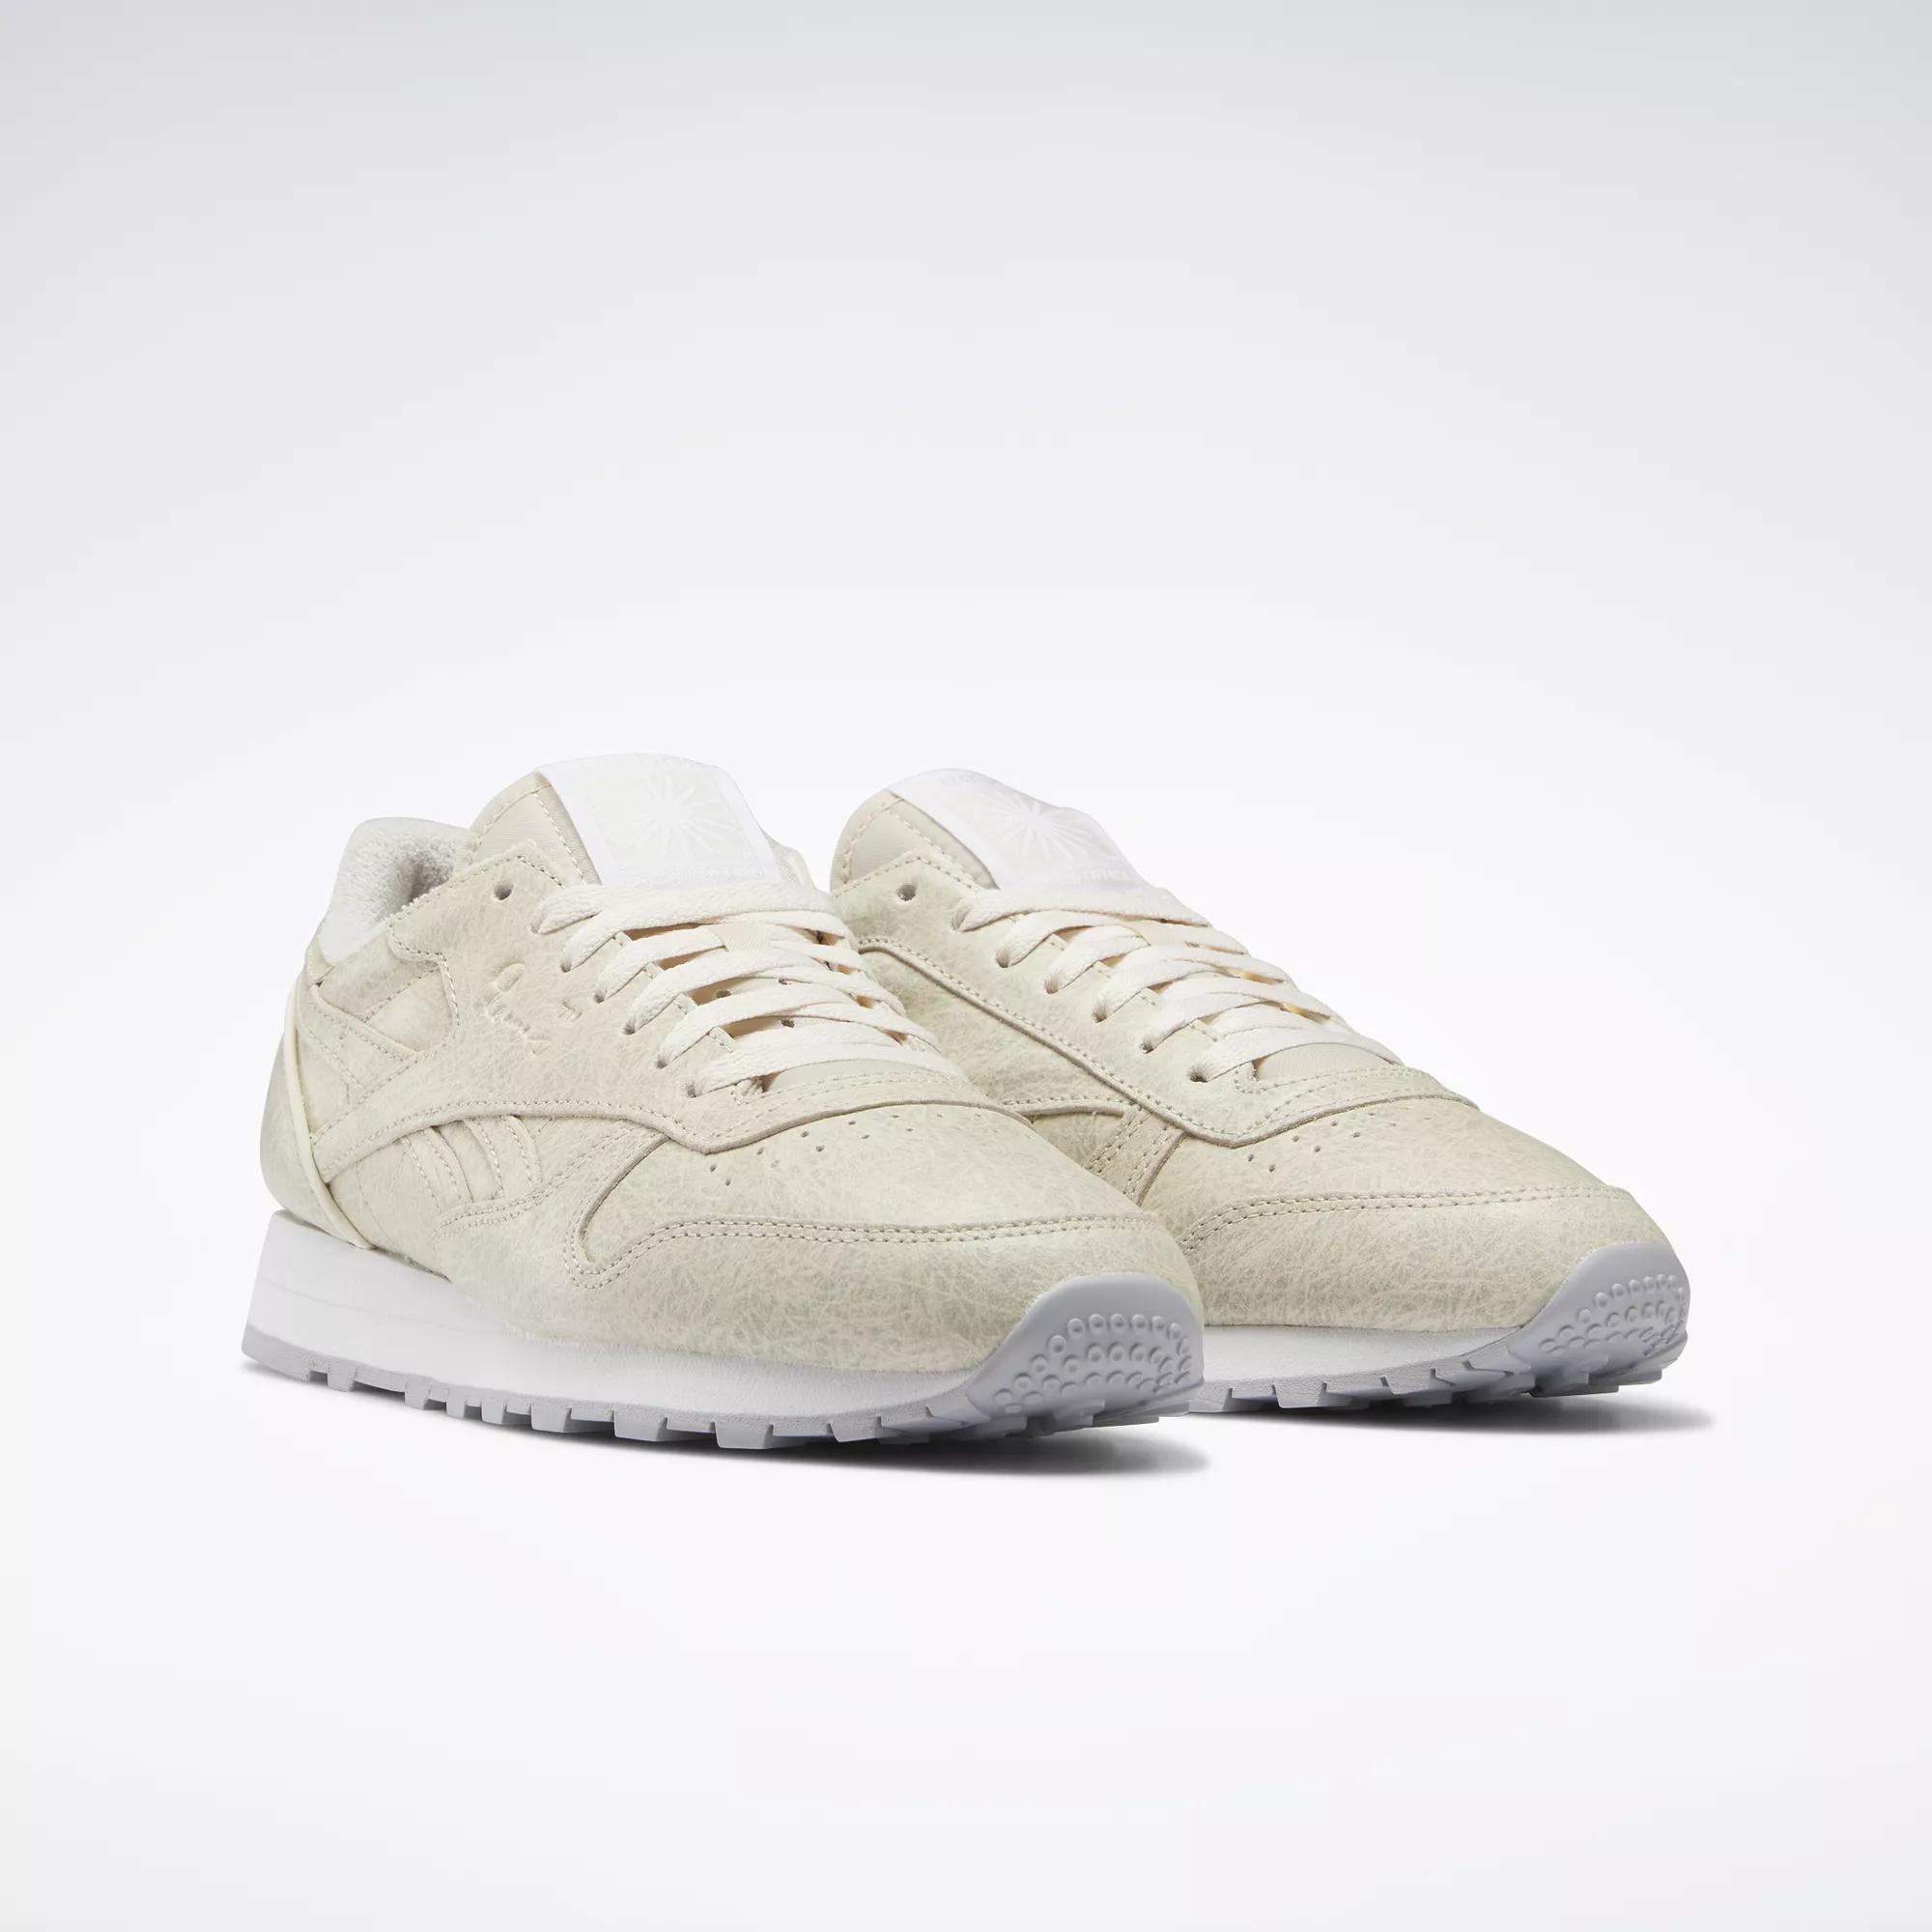 Eames Classic Leather Shoes - Sandtrap / Ftwr White / Cold Grey 2 | Reebok